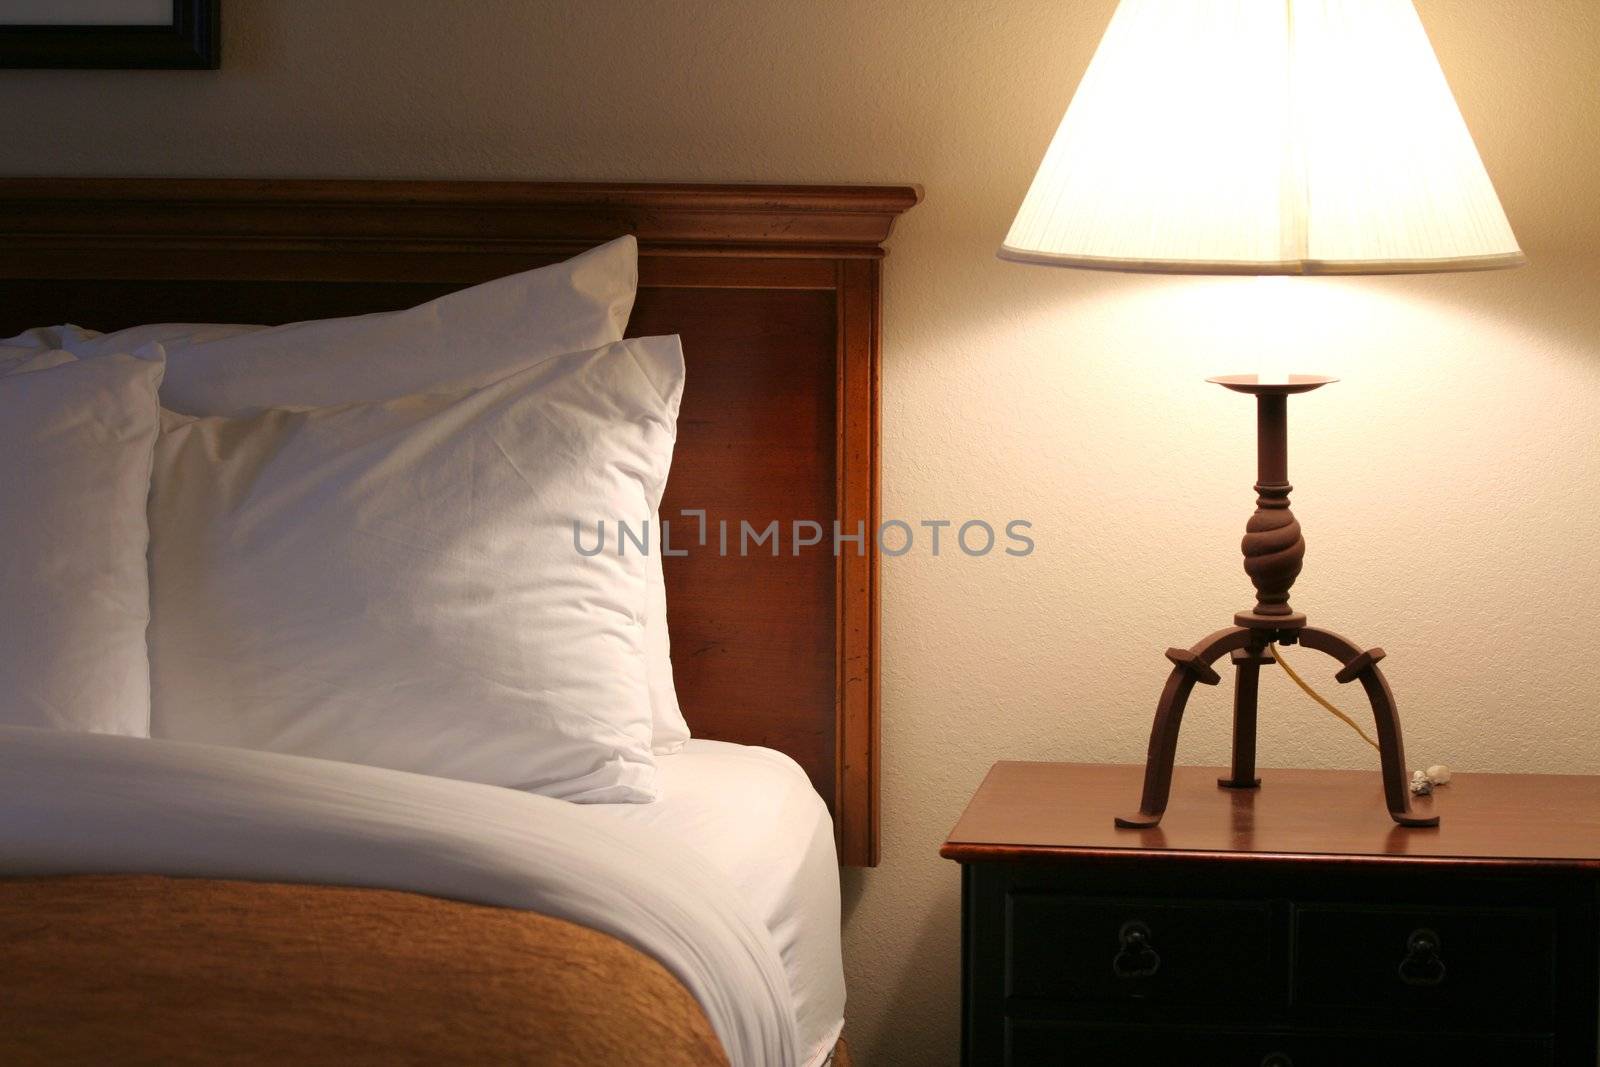 Comfortable and serene bedside lit by lamp light;